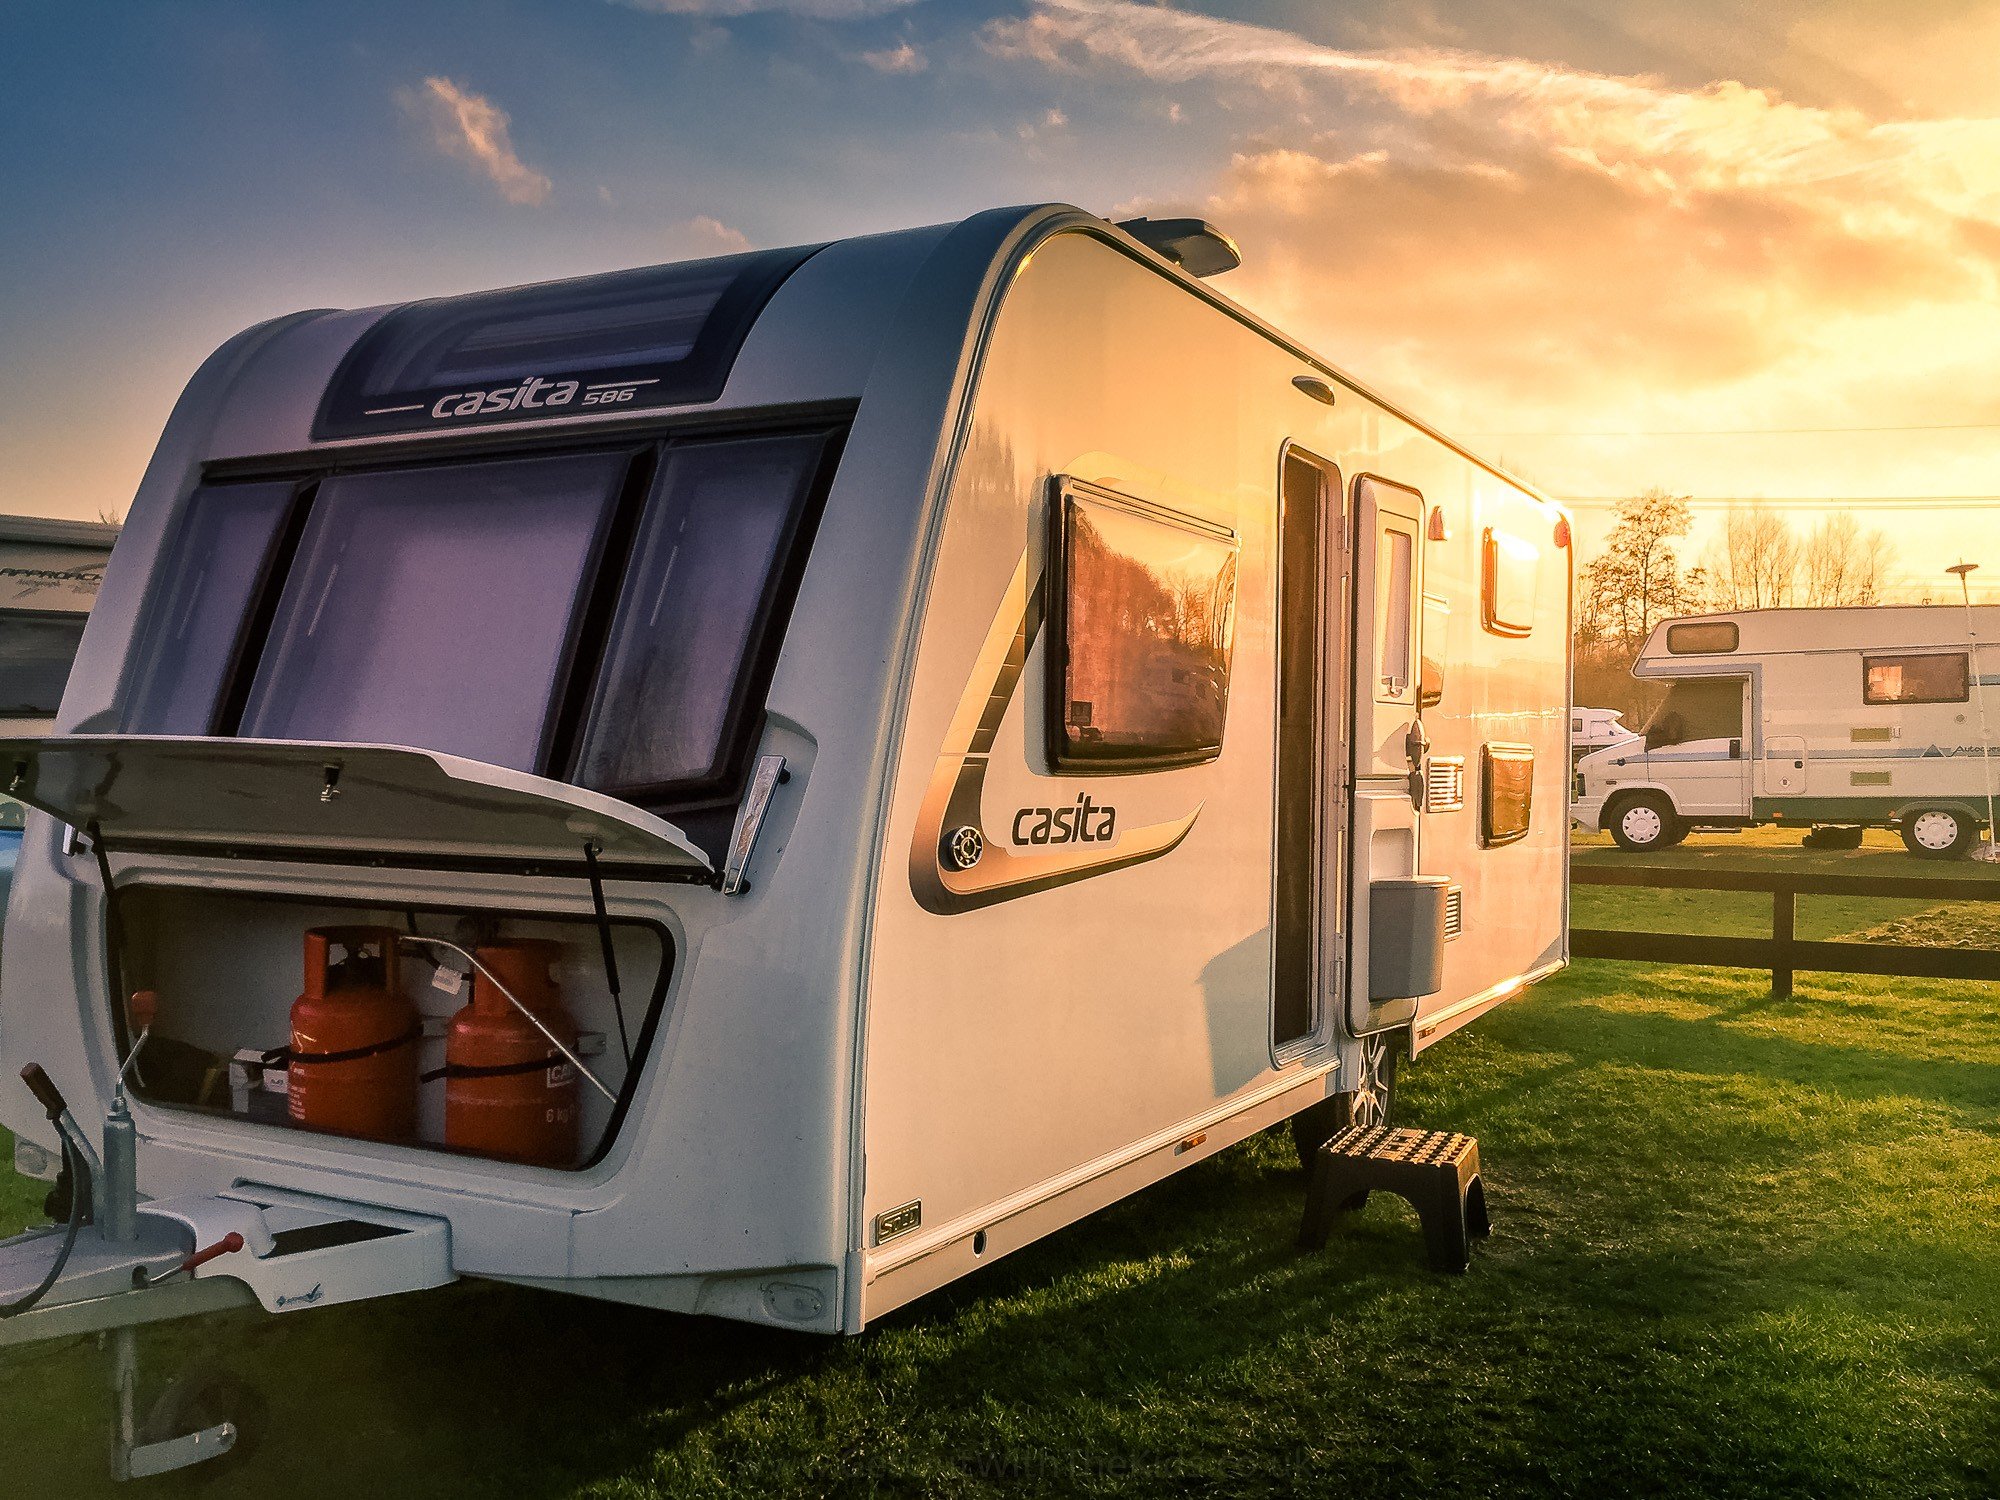 Oxford Camping and Caravanning Club Campsite